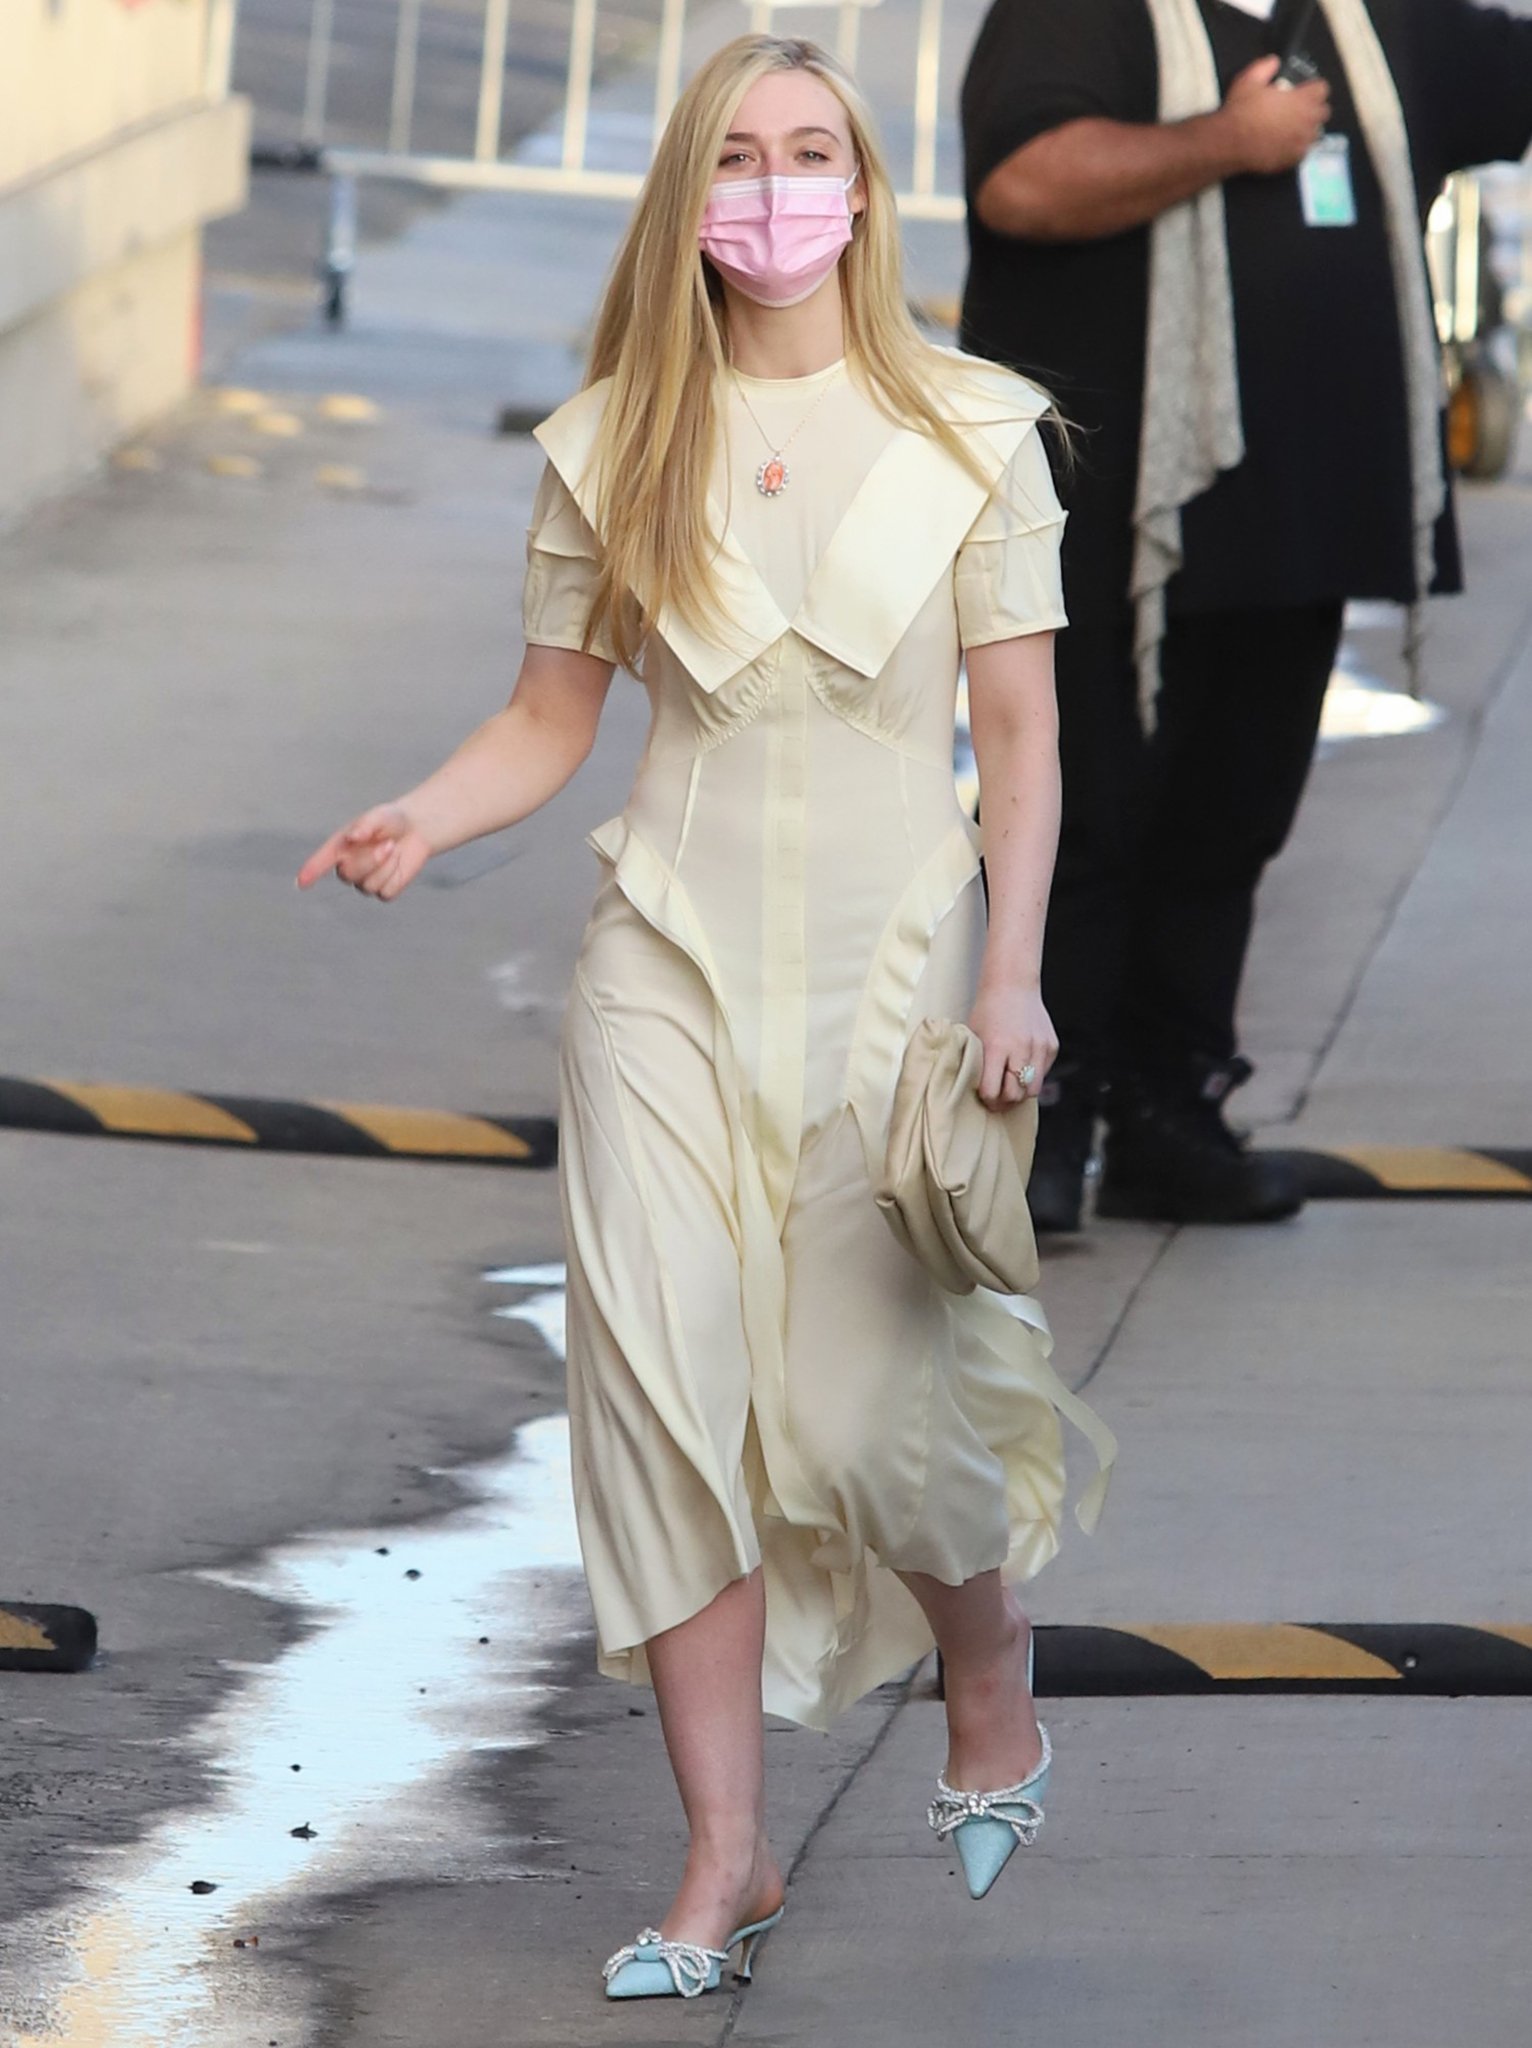 Elle Fanning heads to Jimmy Kimmel Live studio in a conservative yellow dress